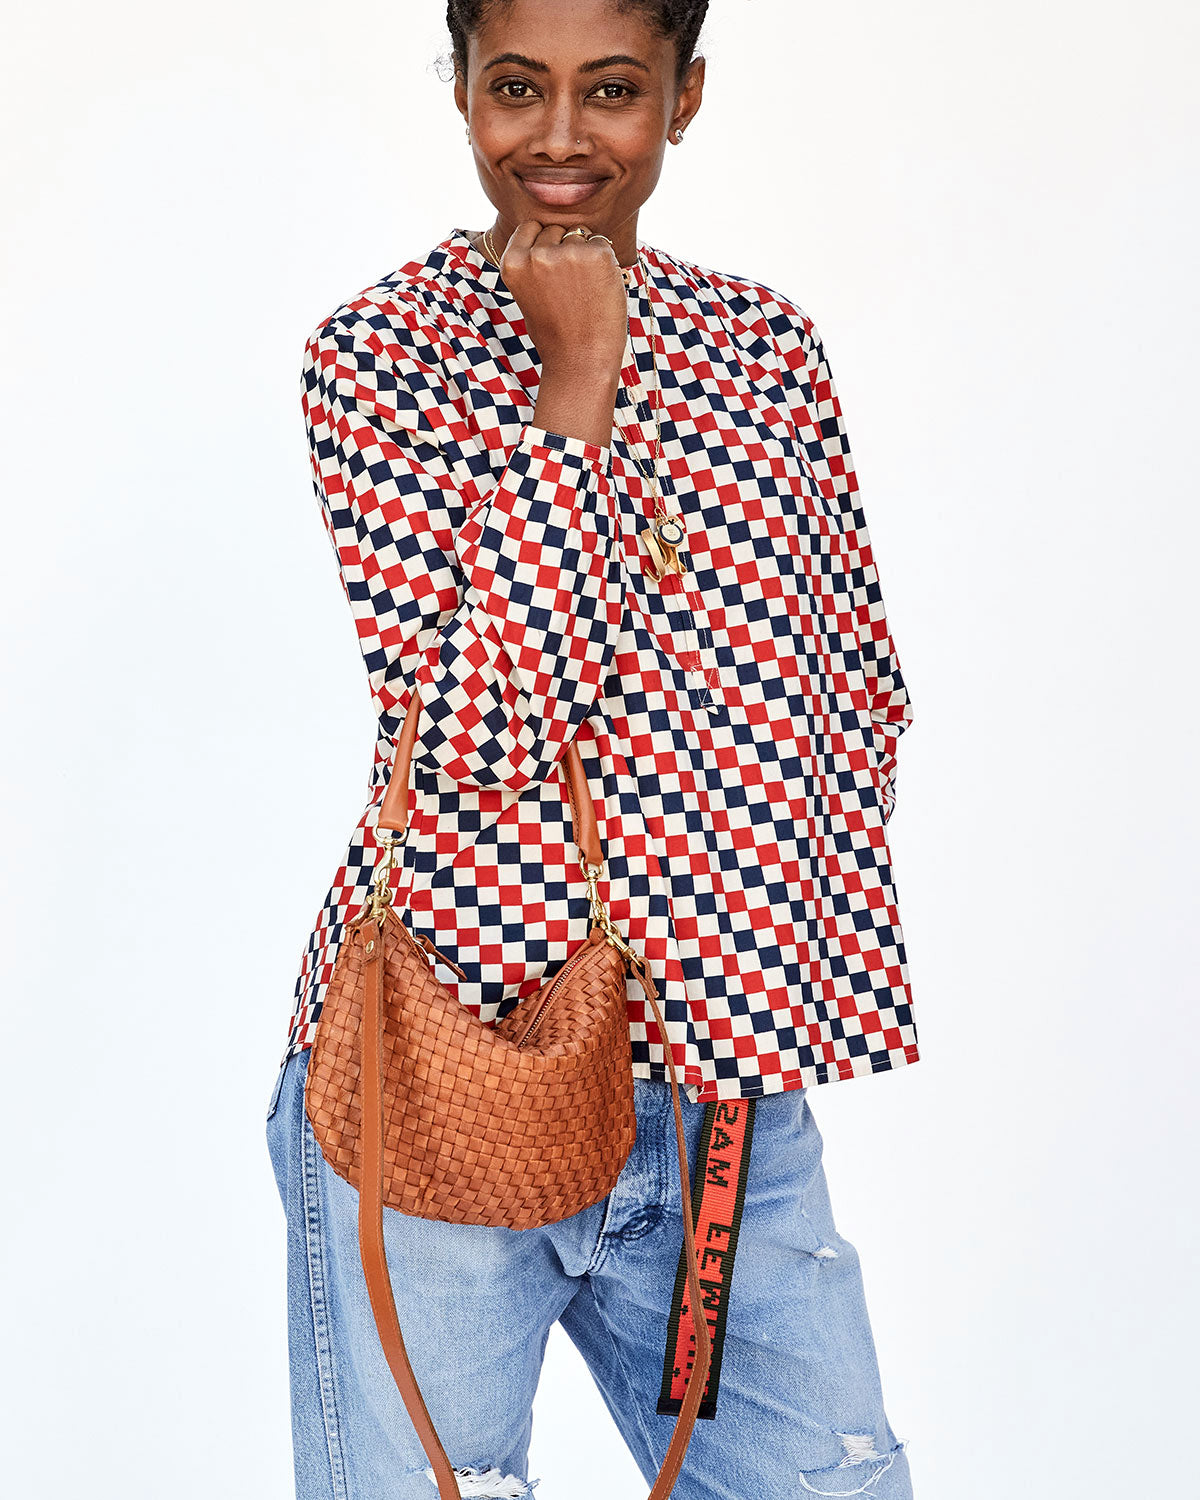 Mecca with her Head resting on her Chin Showing off the Natural Woven Checker Petit Moyen